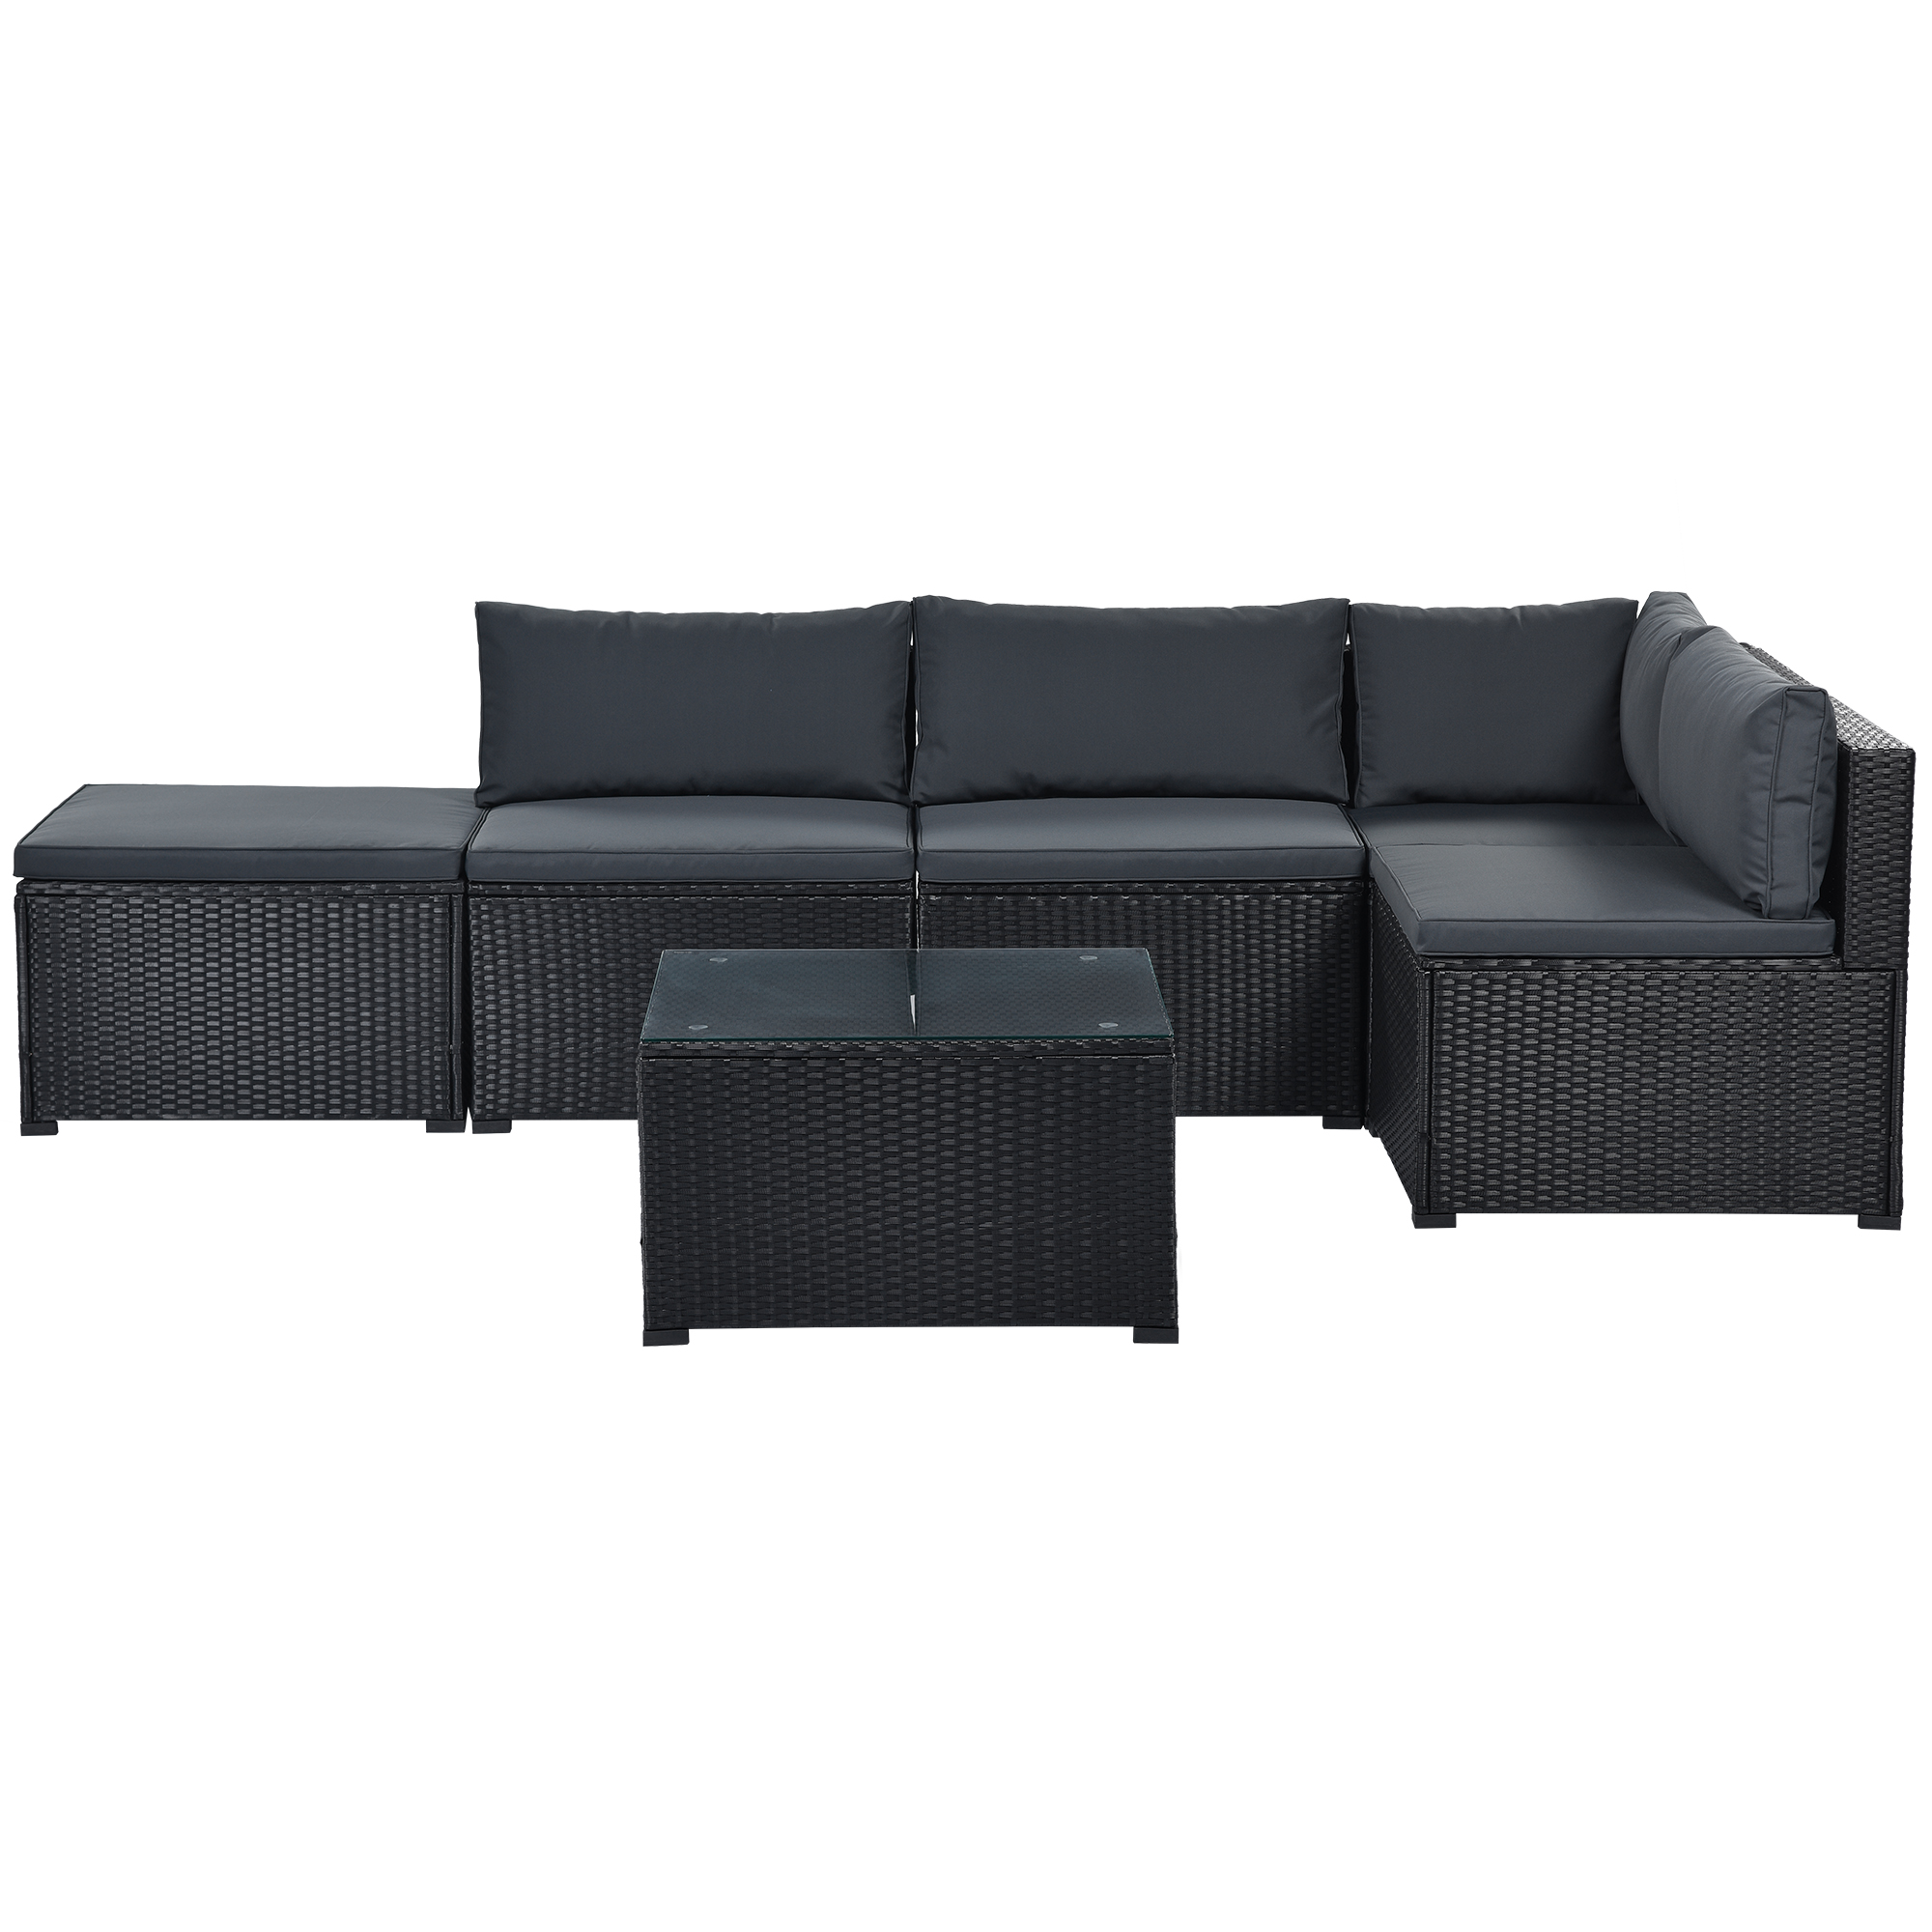 Mondawe 6-Piece Outdoor Furniture Set with PE Rattan Wicker, Patio Garden Sectional Sofa Chair, removable cushions (Black wicker, Beige cushion)-Mondawe